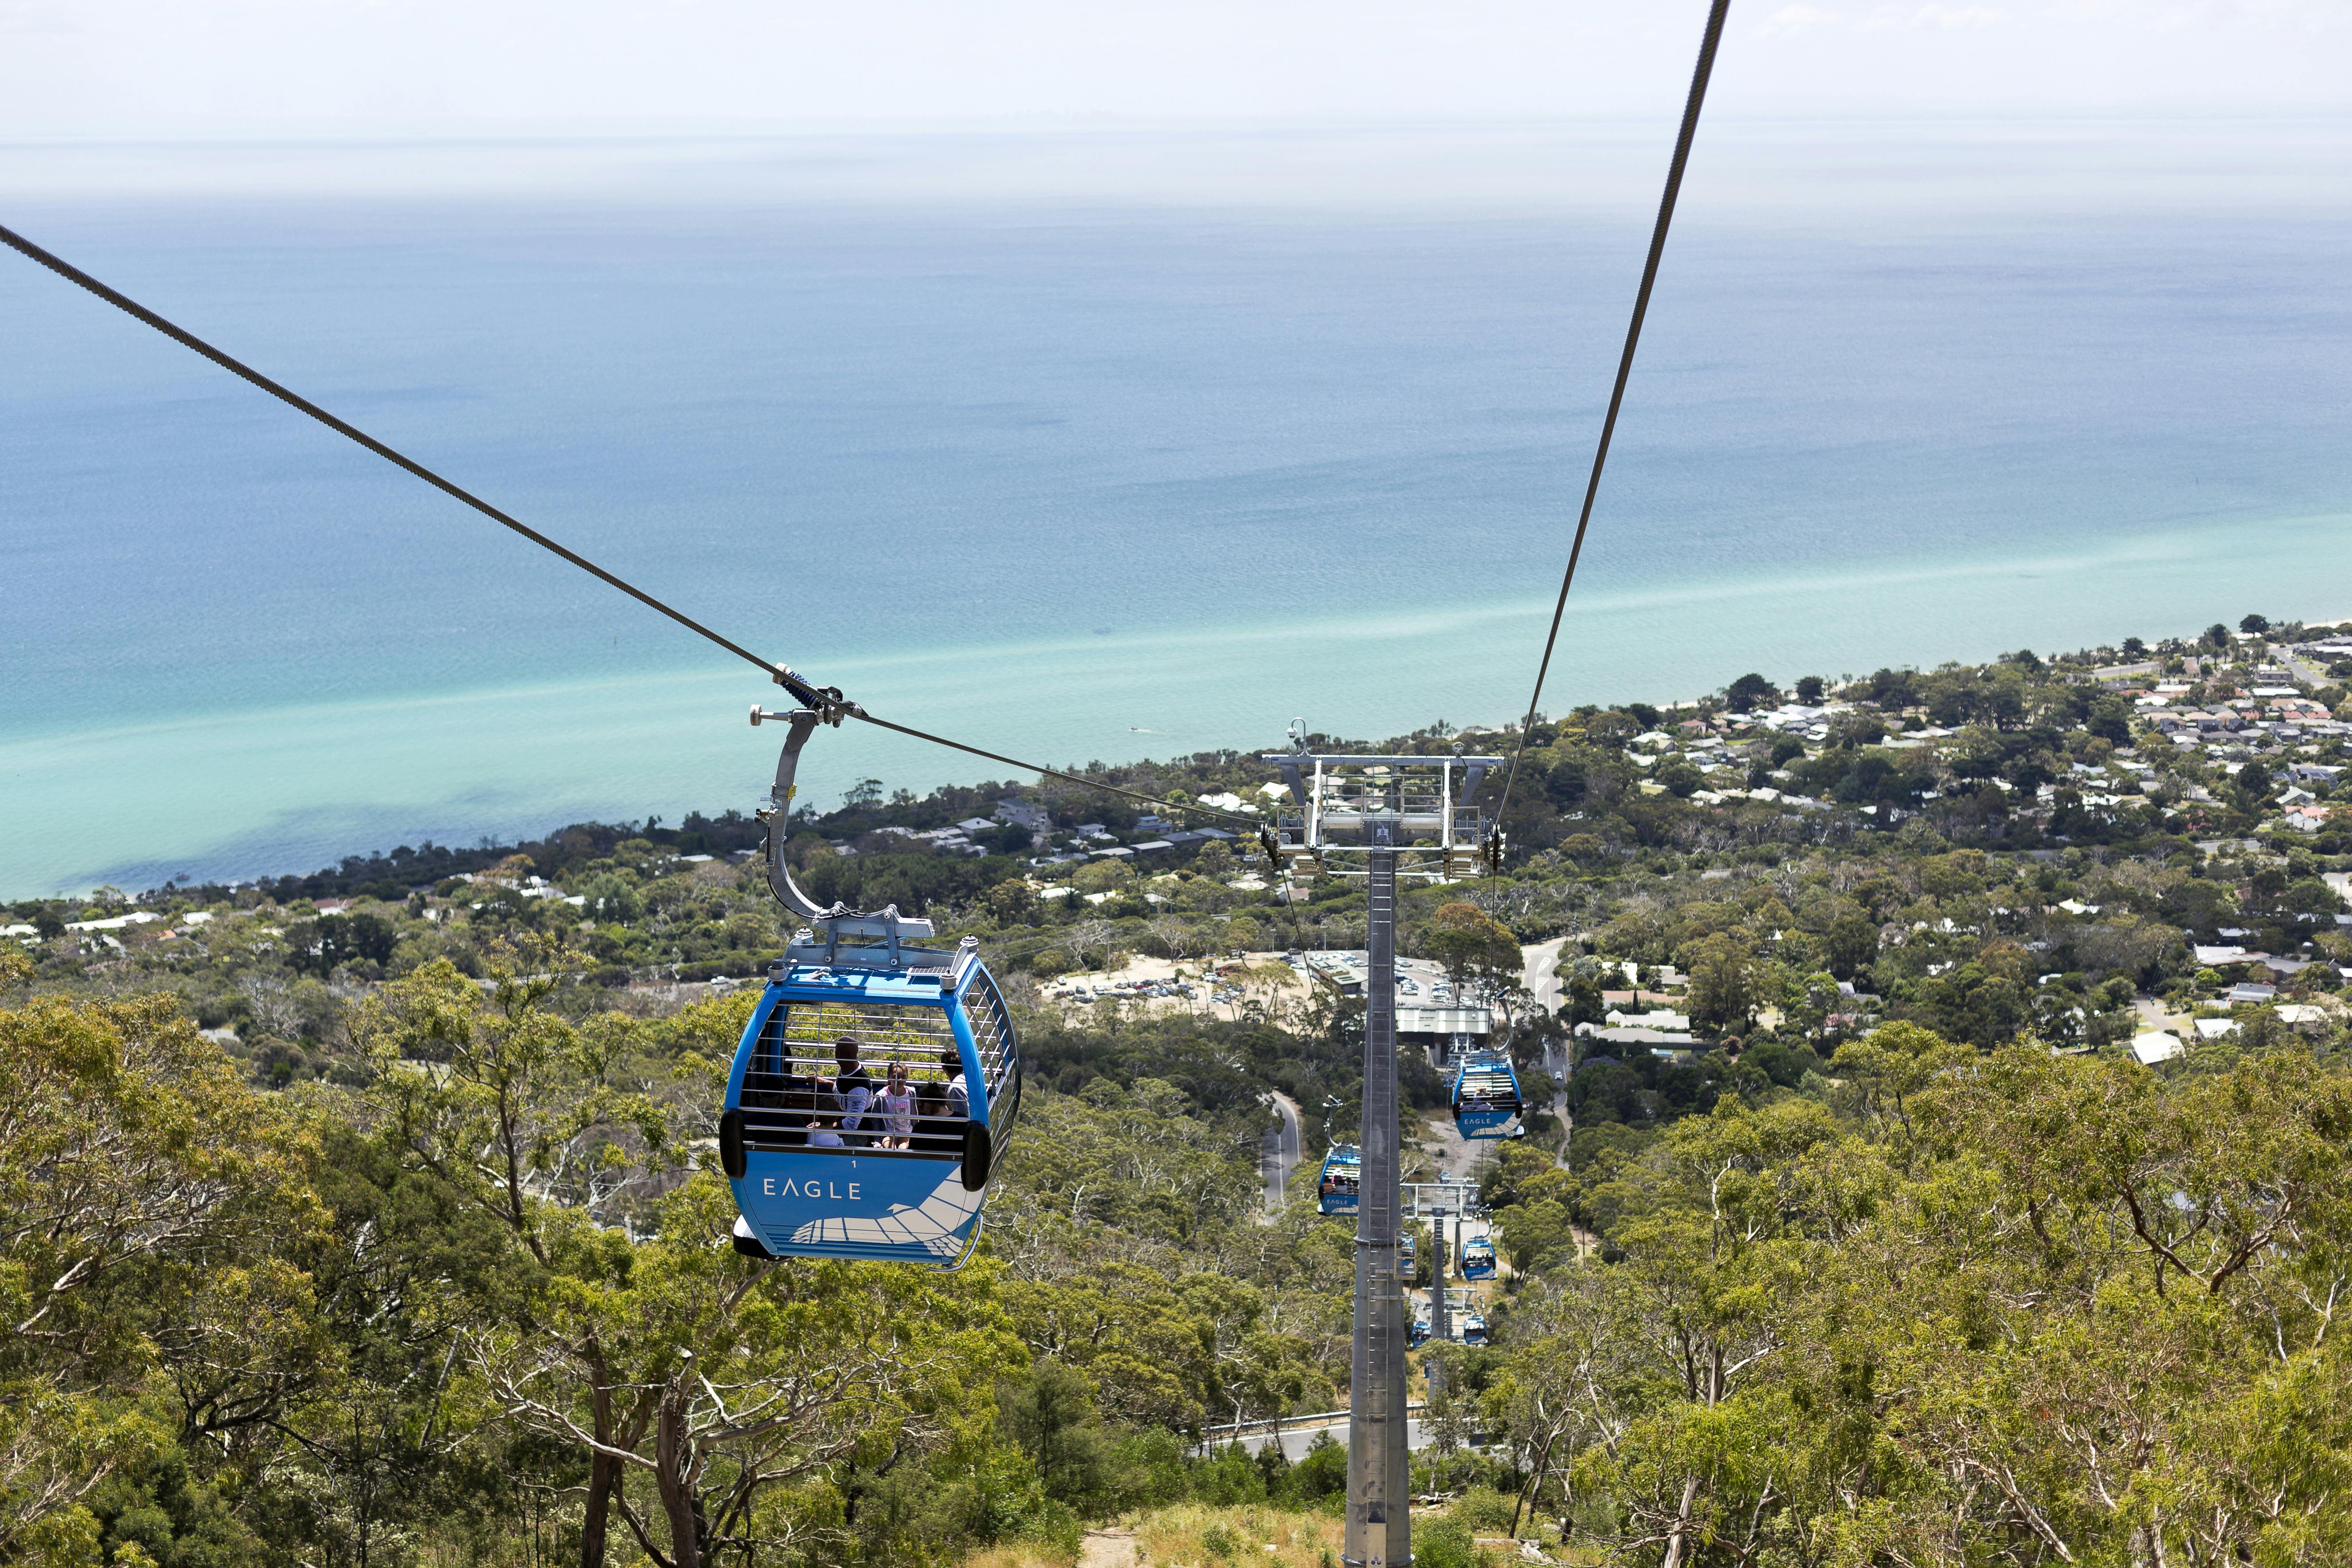 Mornington Peninsula scenic bus tour including chairlift lunch choc tasting and more Musement